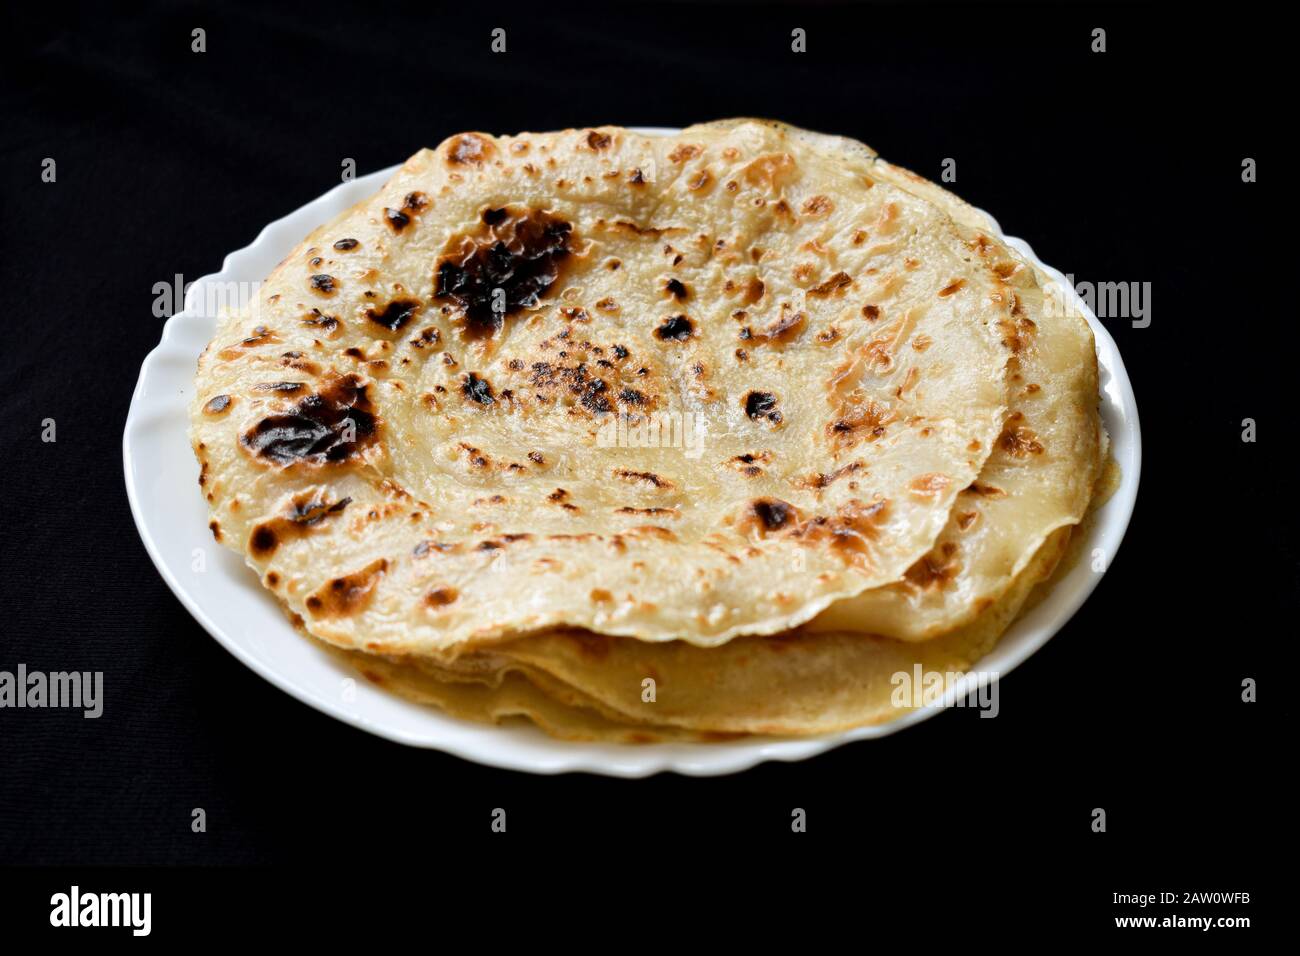 a plate of traditional thin flat bread of somali people on a dark background Stock Photo